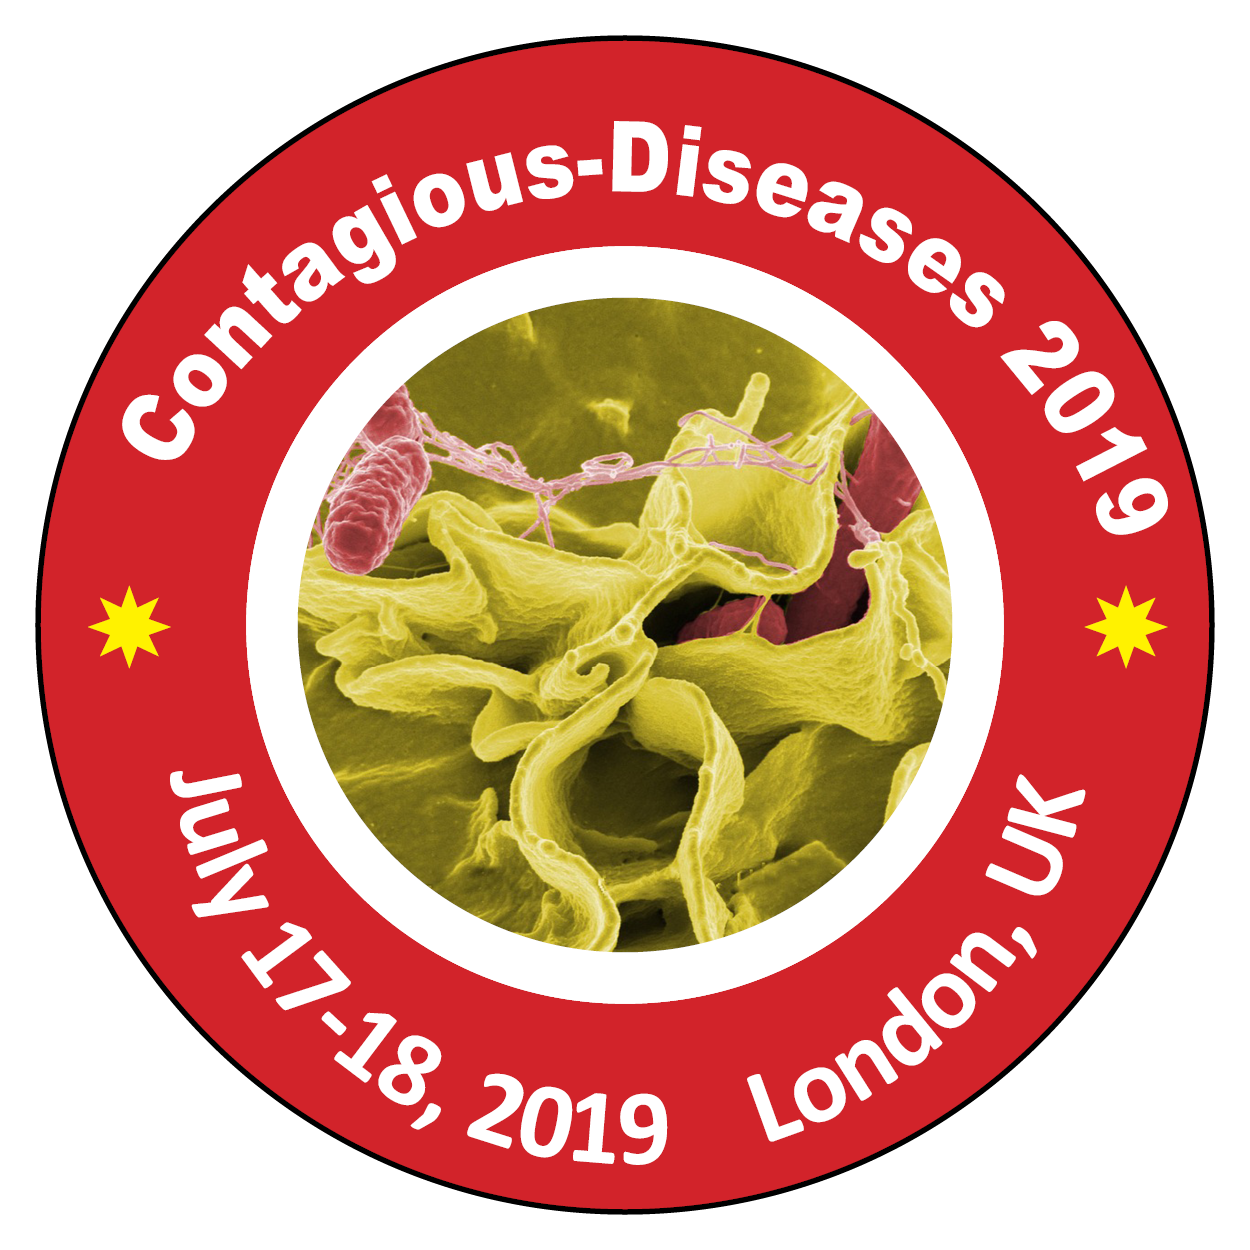 International Conference on Contagious Diseases and Anatomy